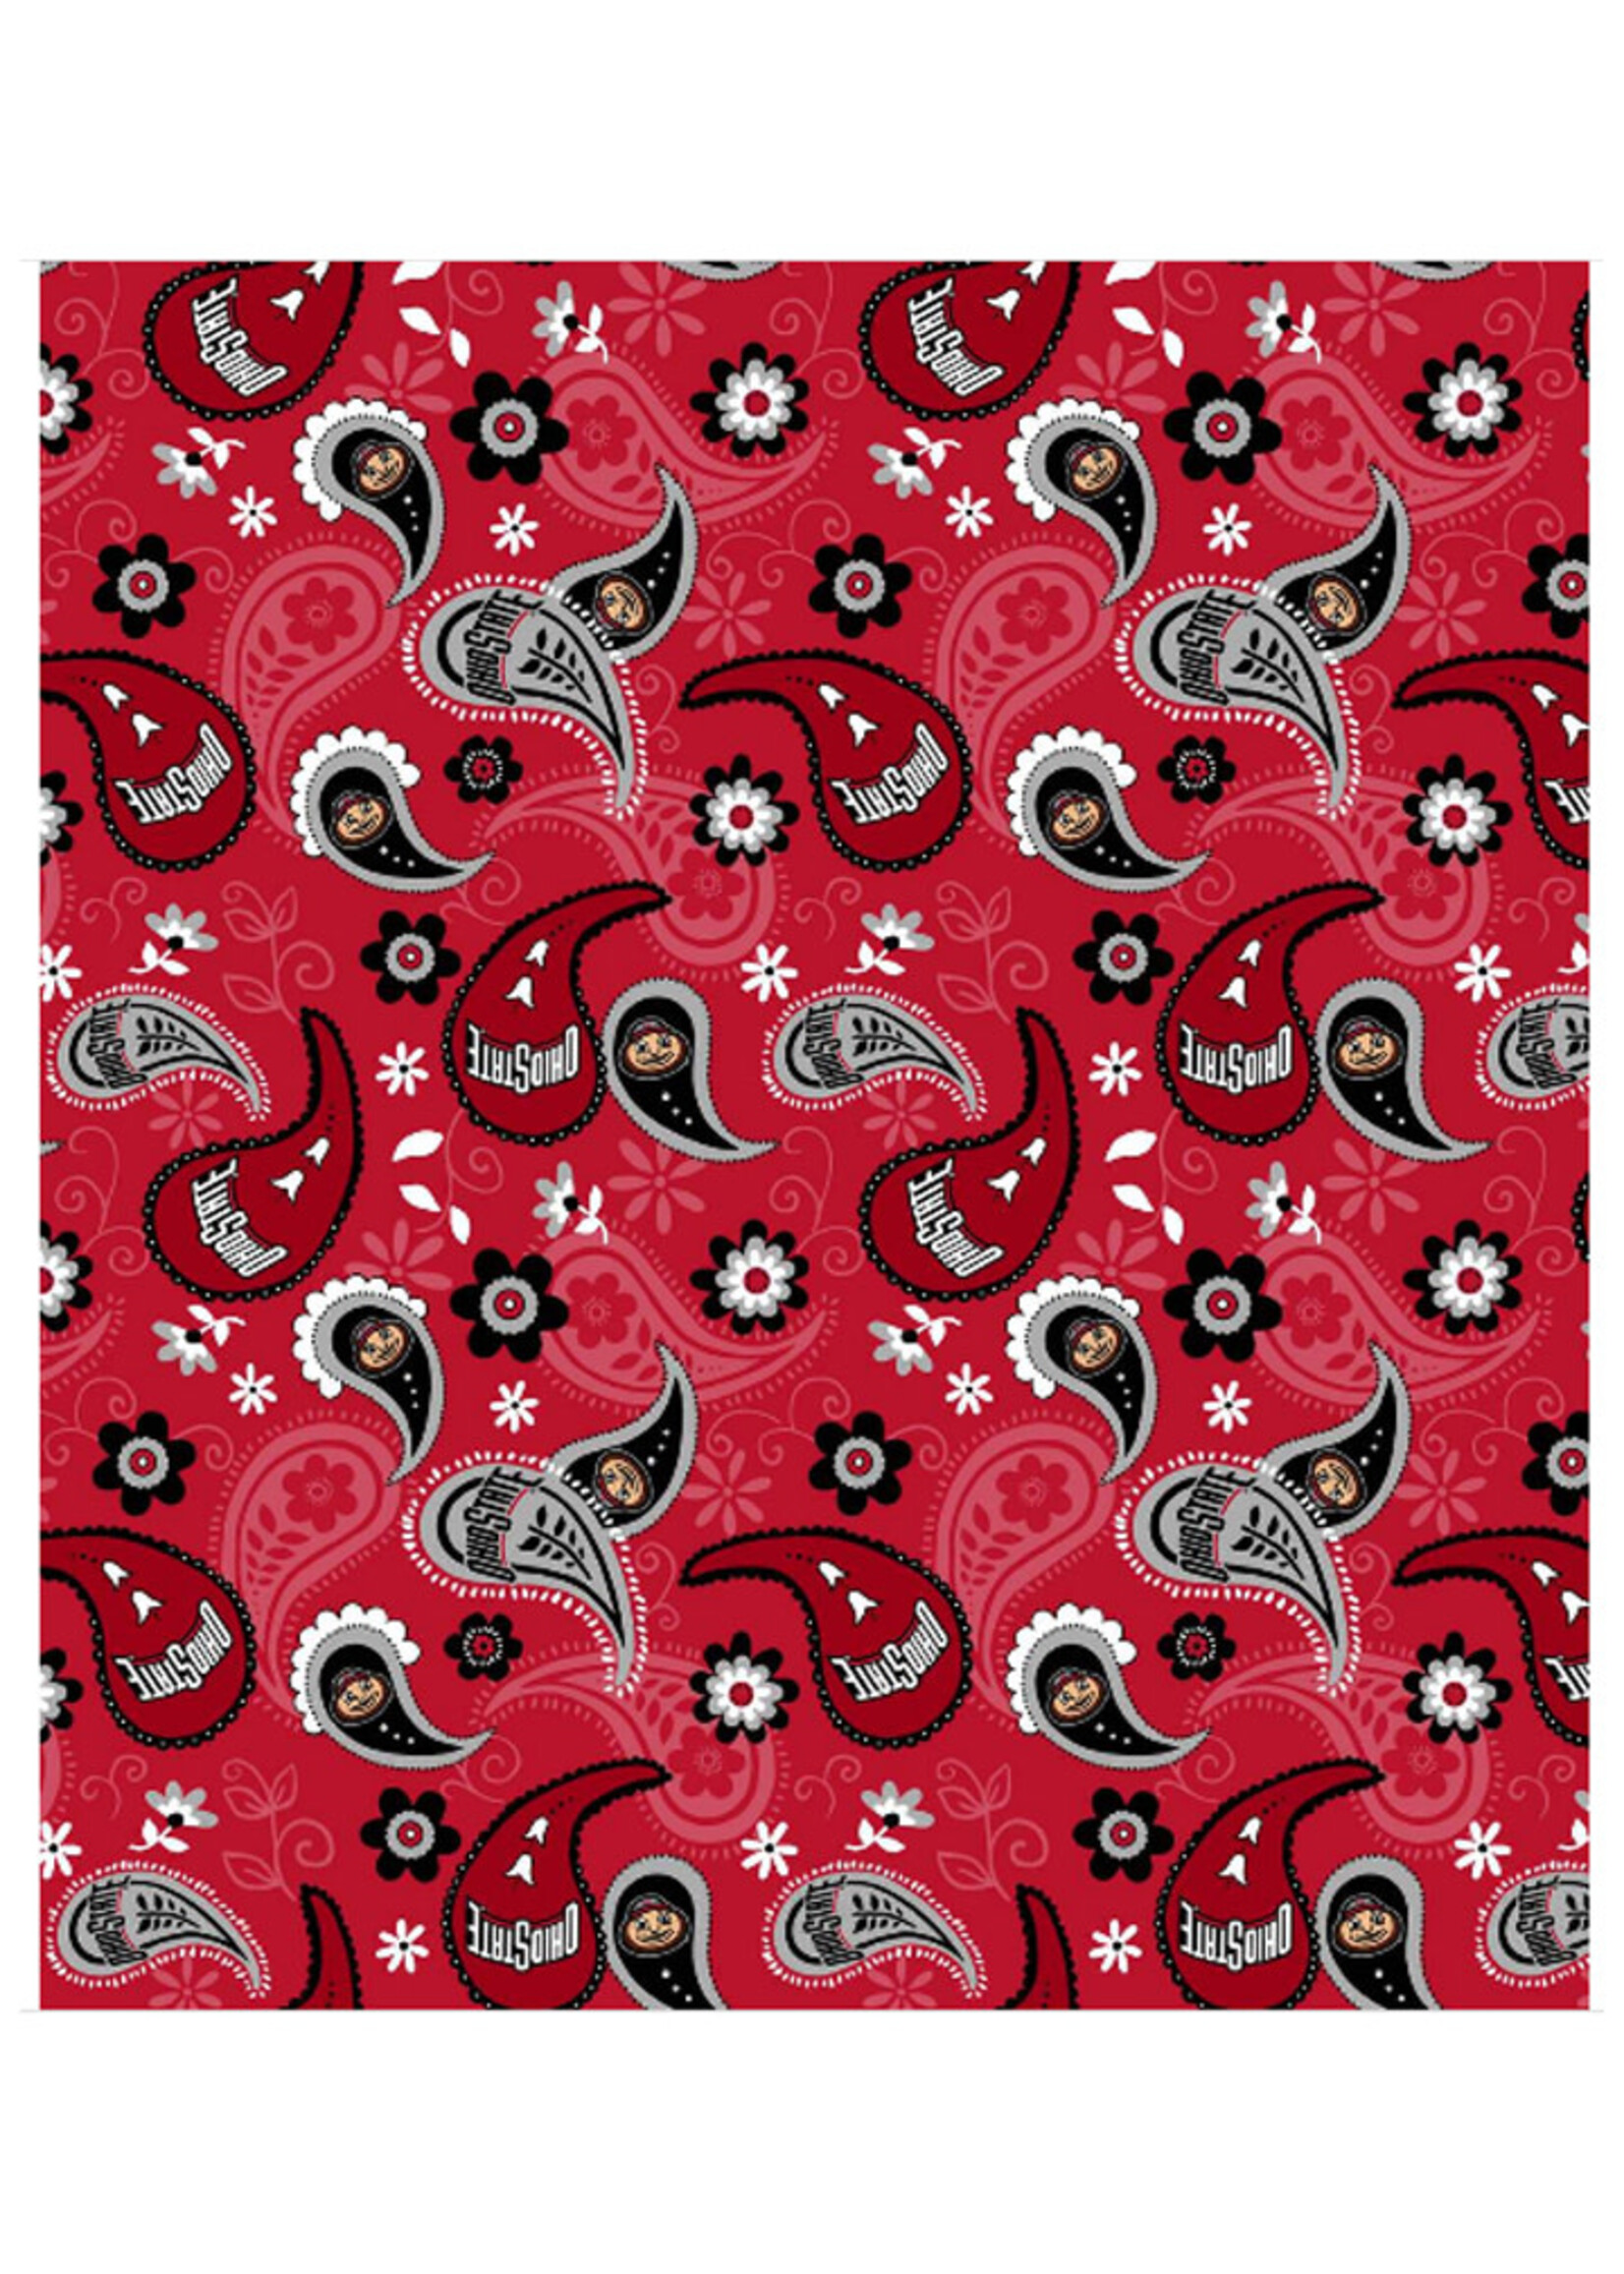 Ohio State Buckeyes Paisley Cotton Material 15ydsx42in